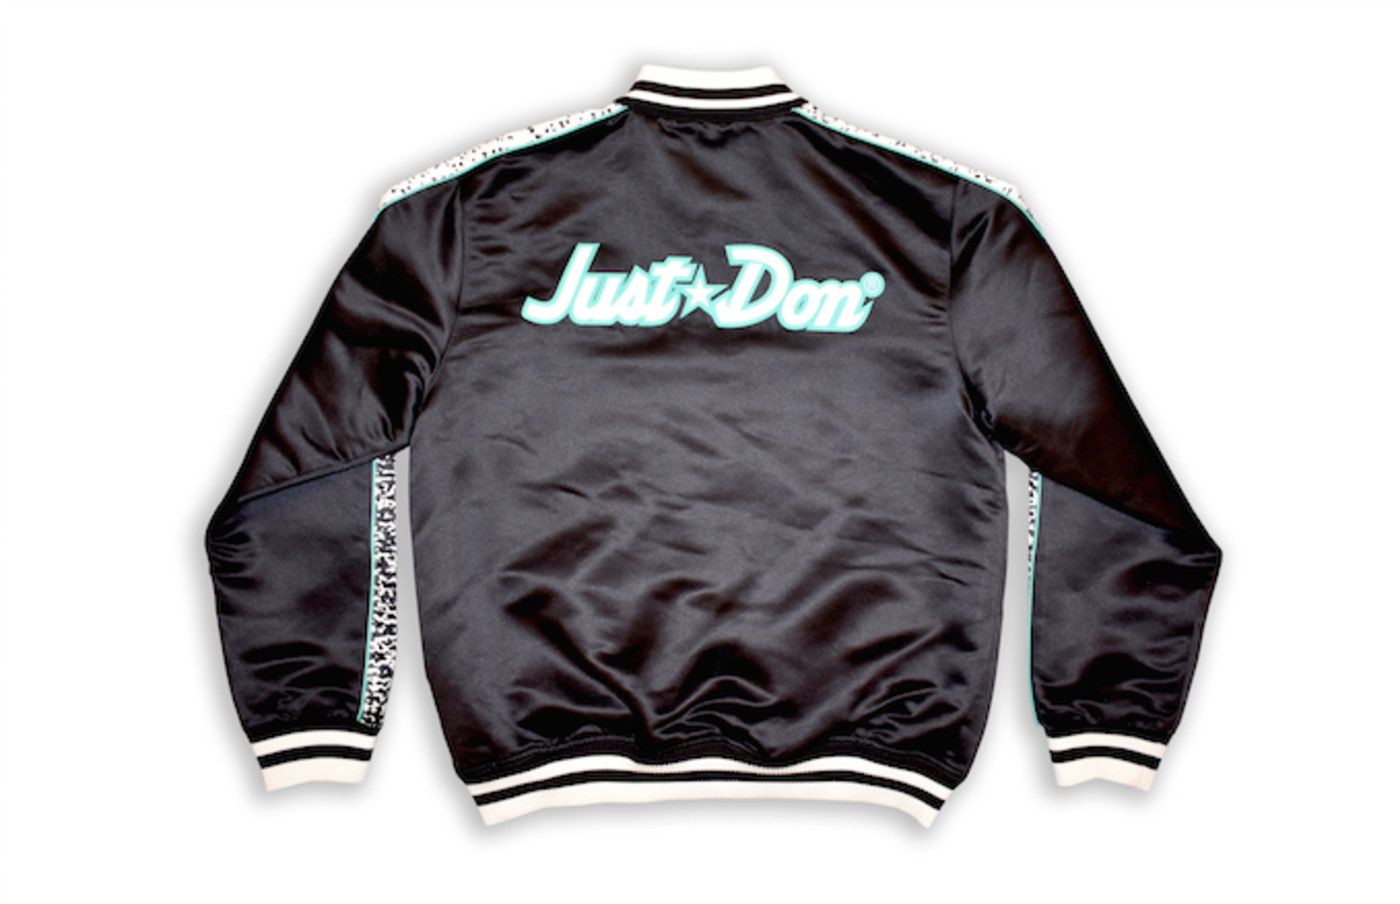 Mitchell & Ness and Just Don Team Up for 'NBA Jam' Capsule | Complex